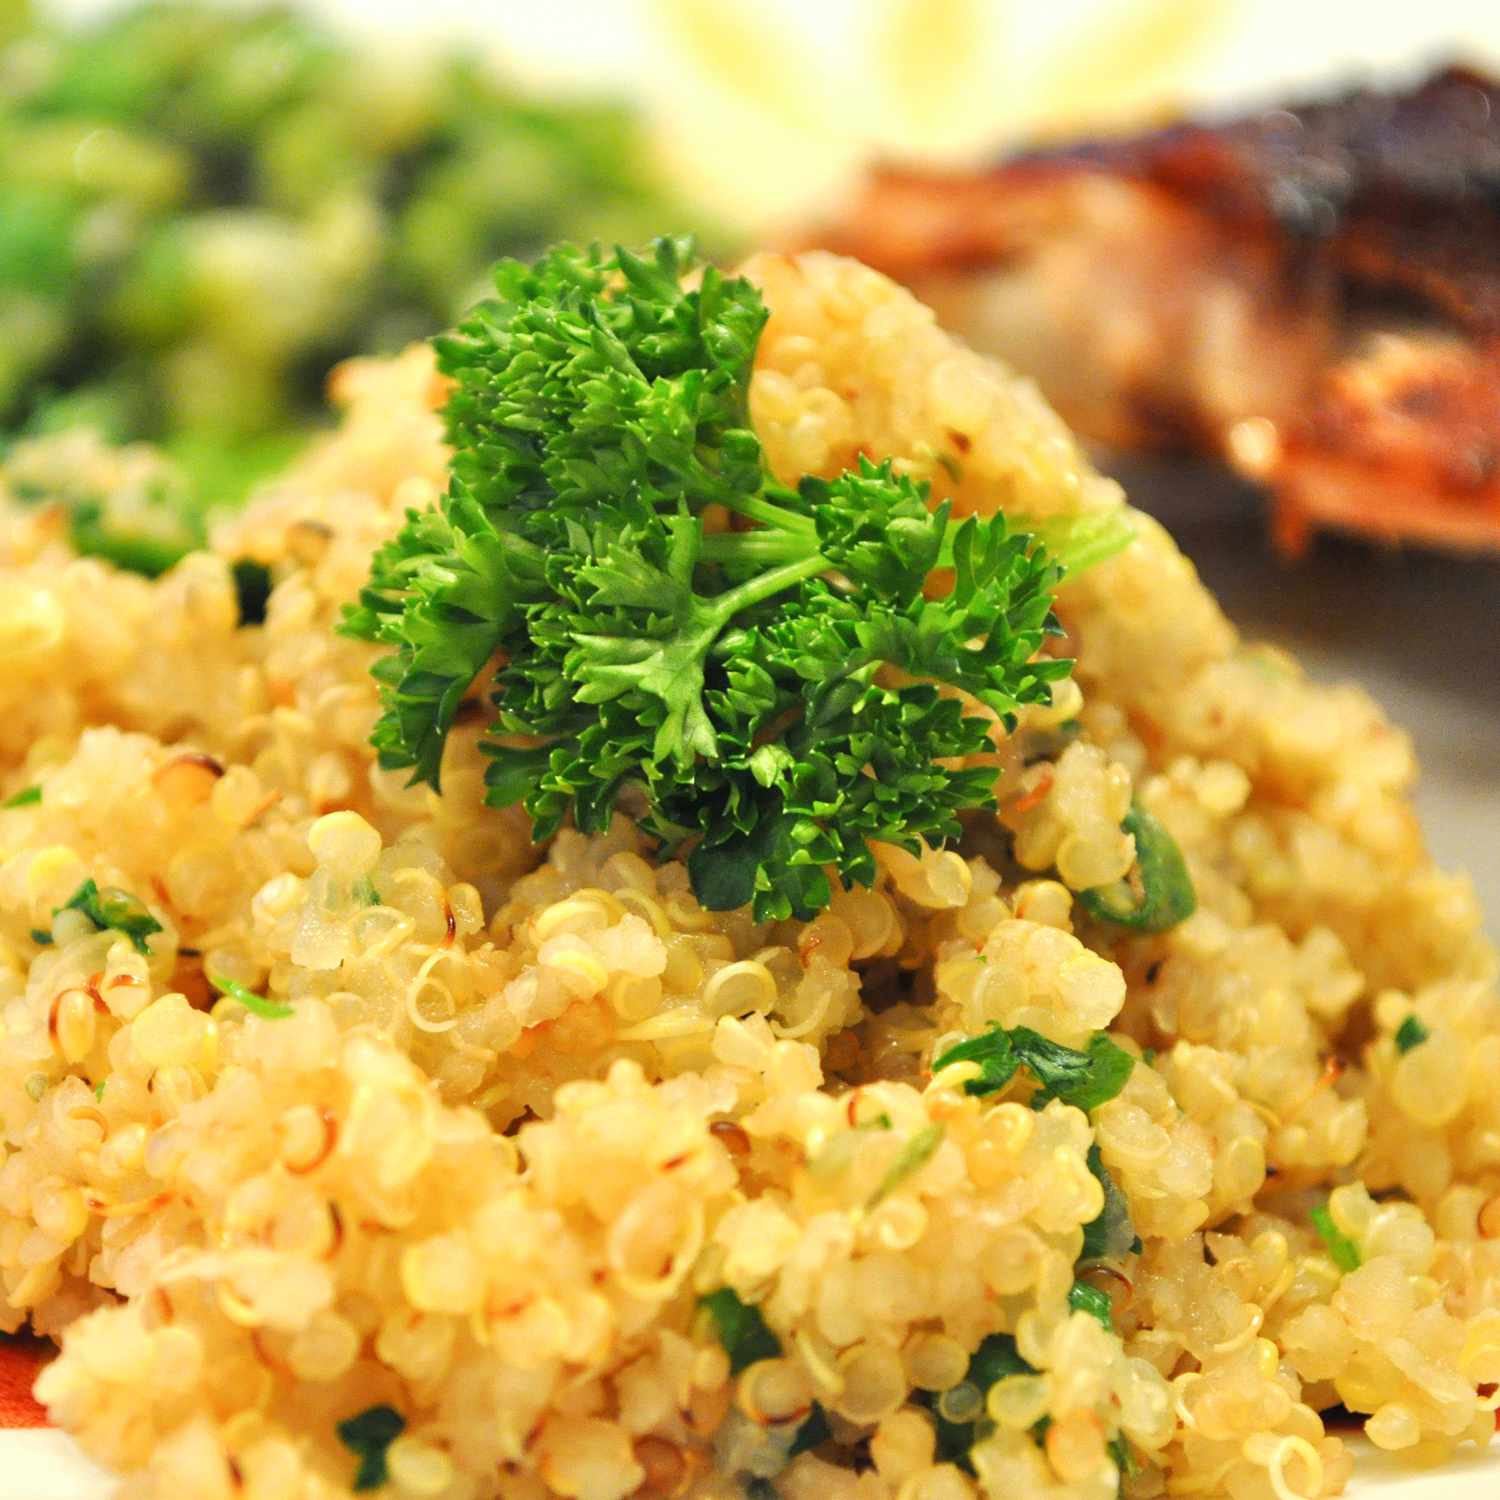 Close up view of a Quinoa Side Dish garnished with fresh herbs